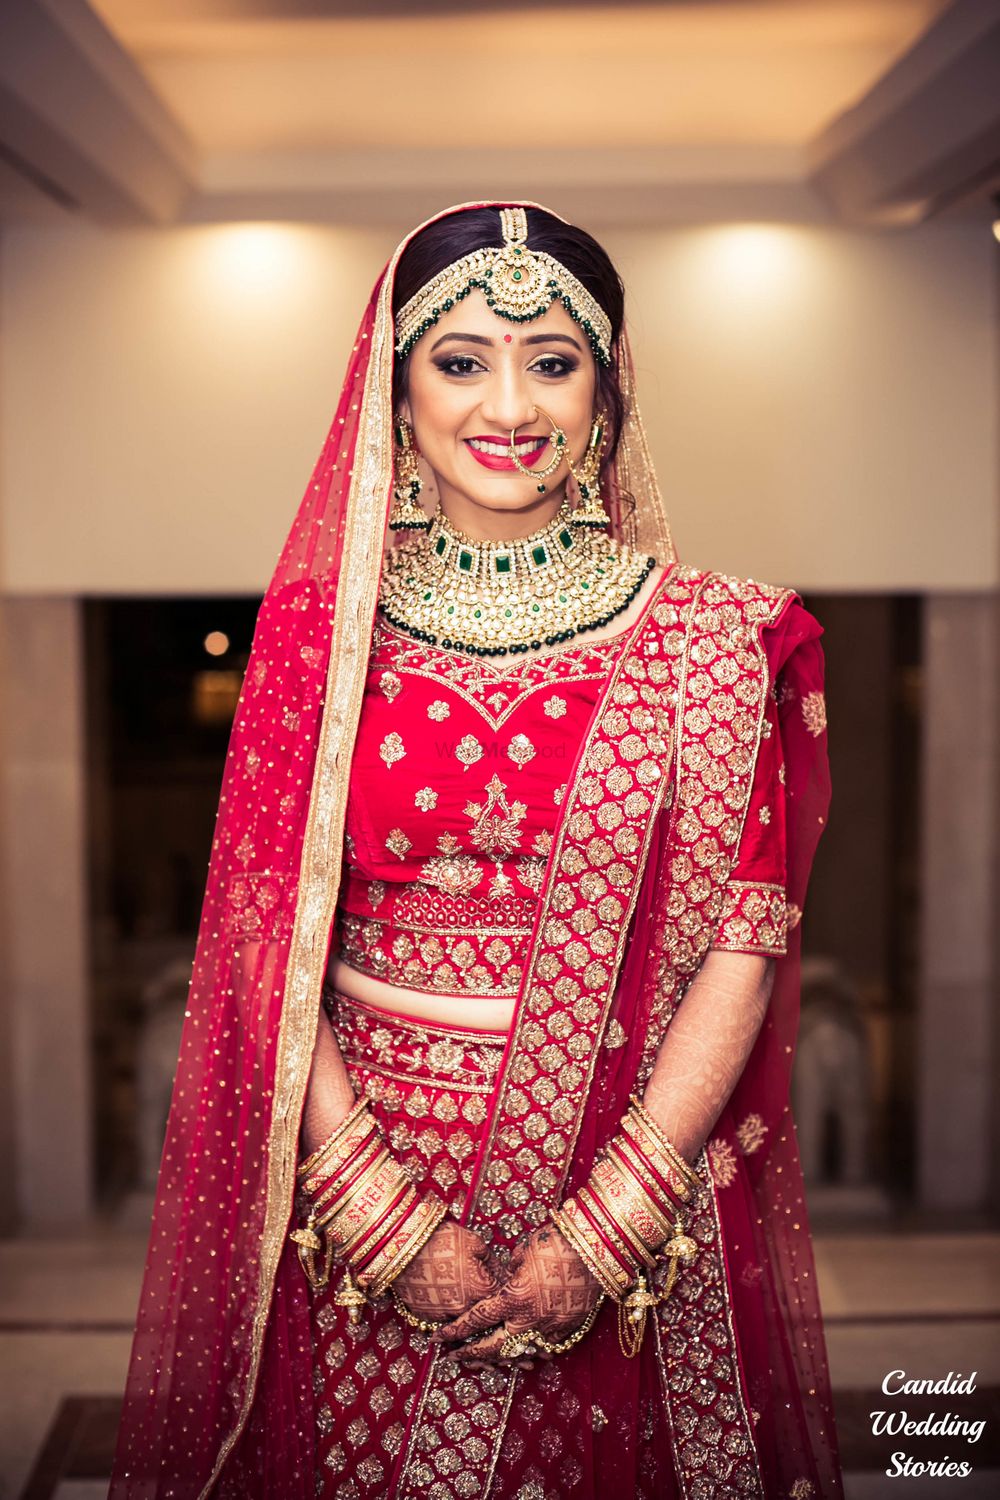 Photo From Bridal Portrait - By Candid Wedding Stories